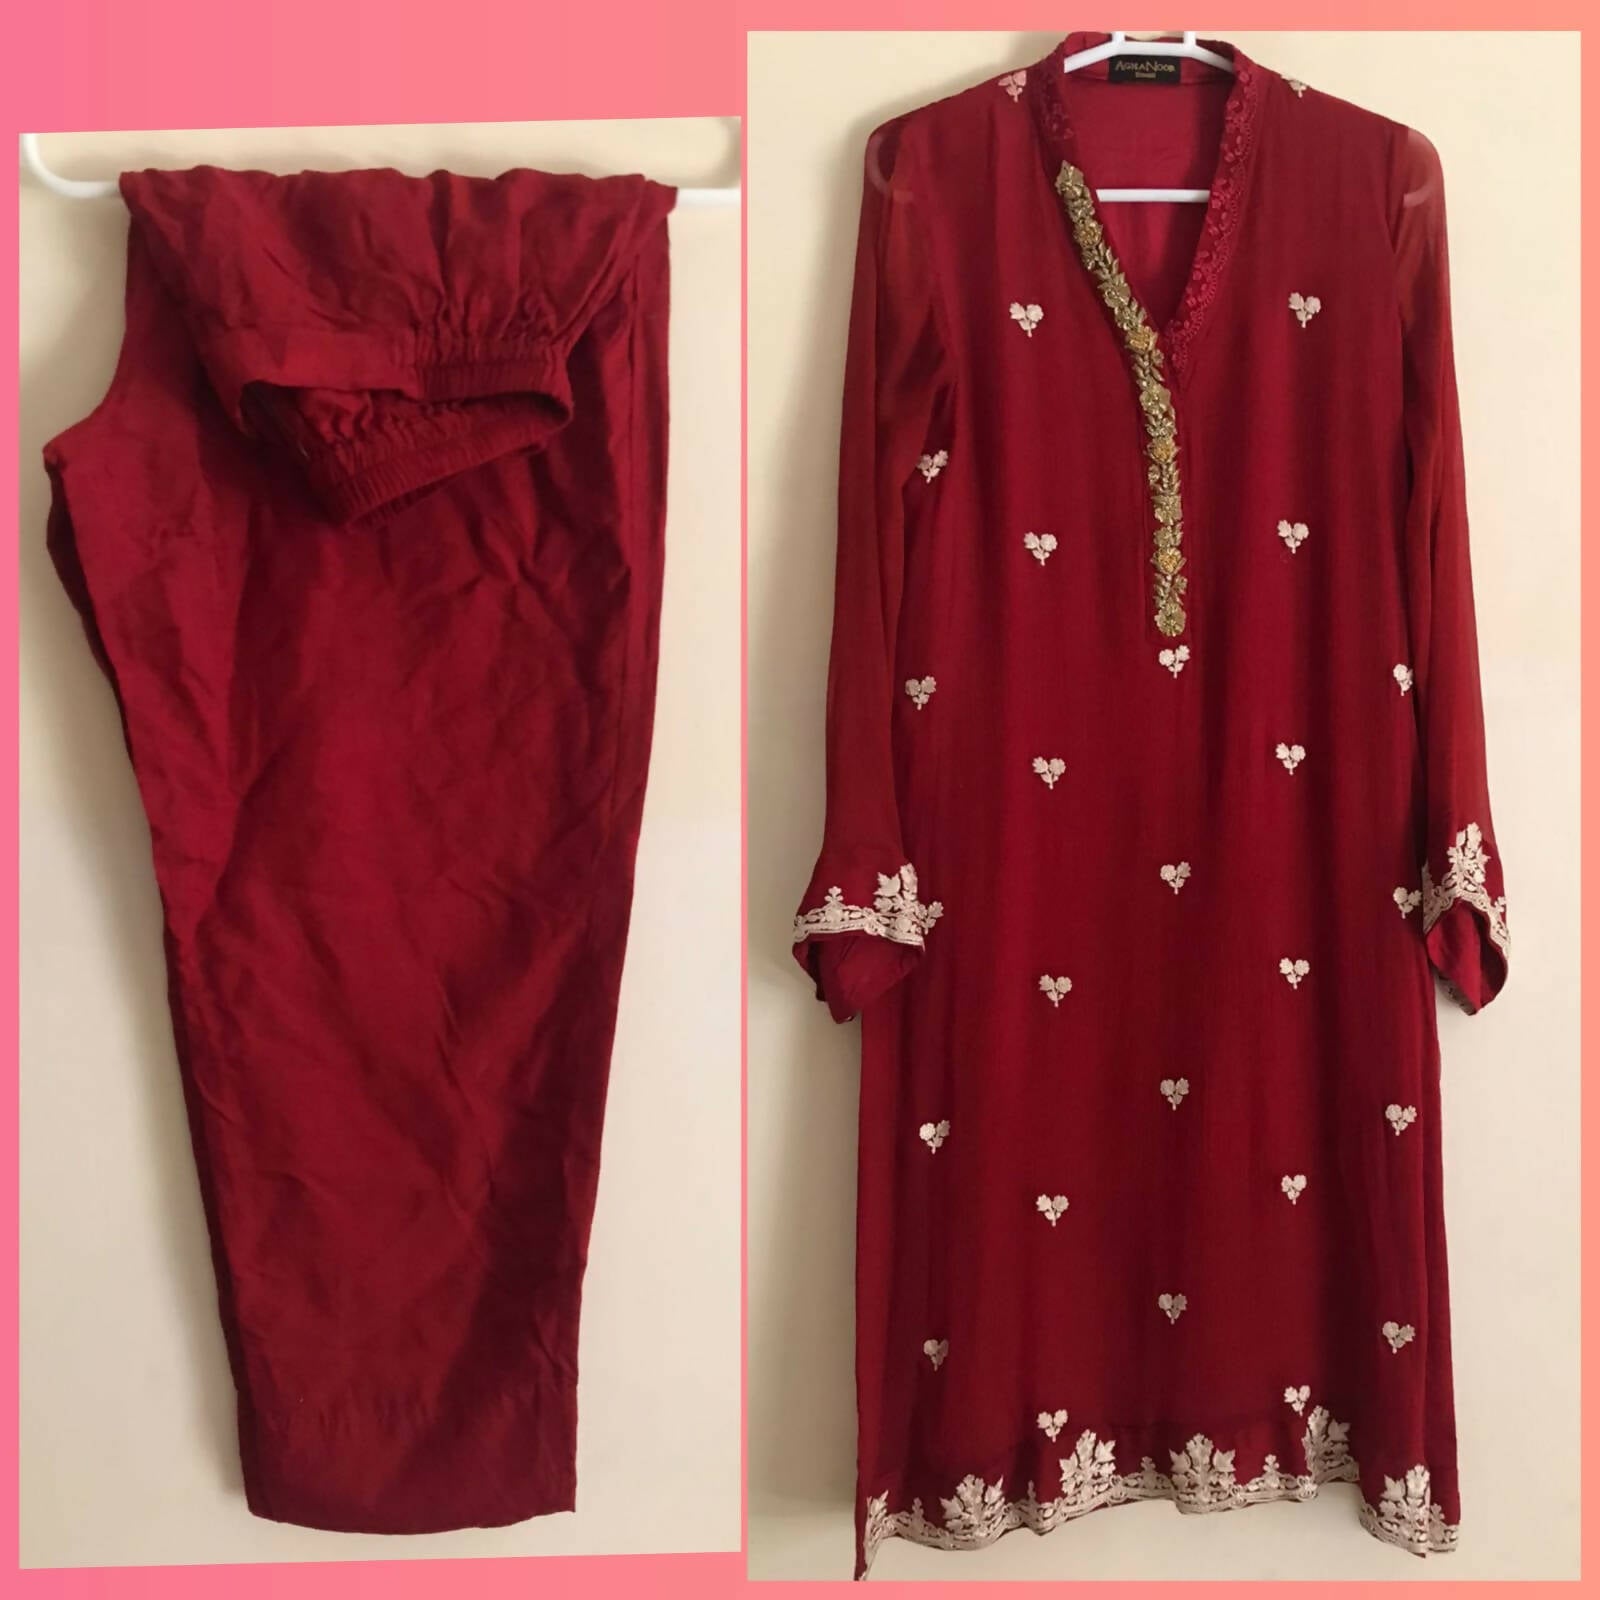 Agha Noor | Embroidered Fancy Red Dress (Size: M ) | Women Branded Formals | Worn Once